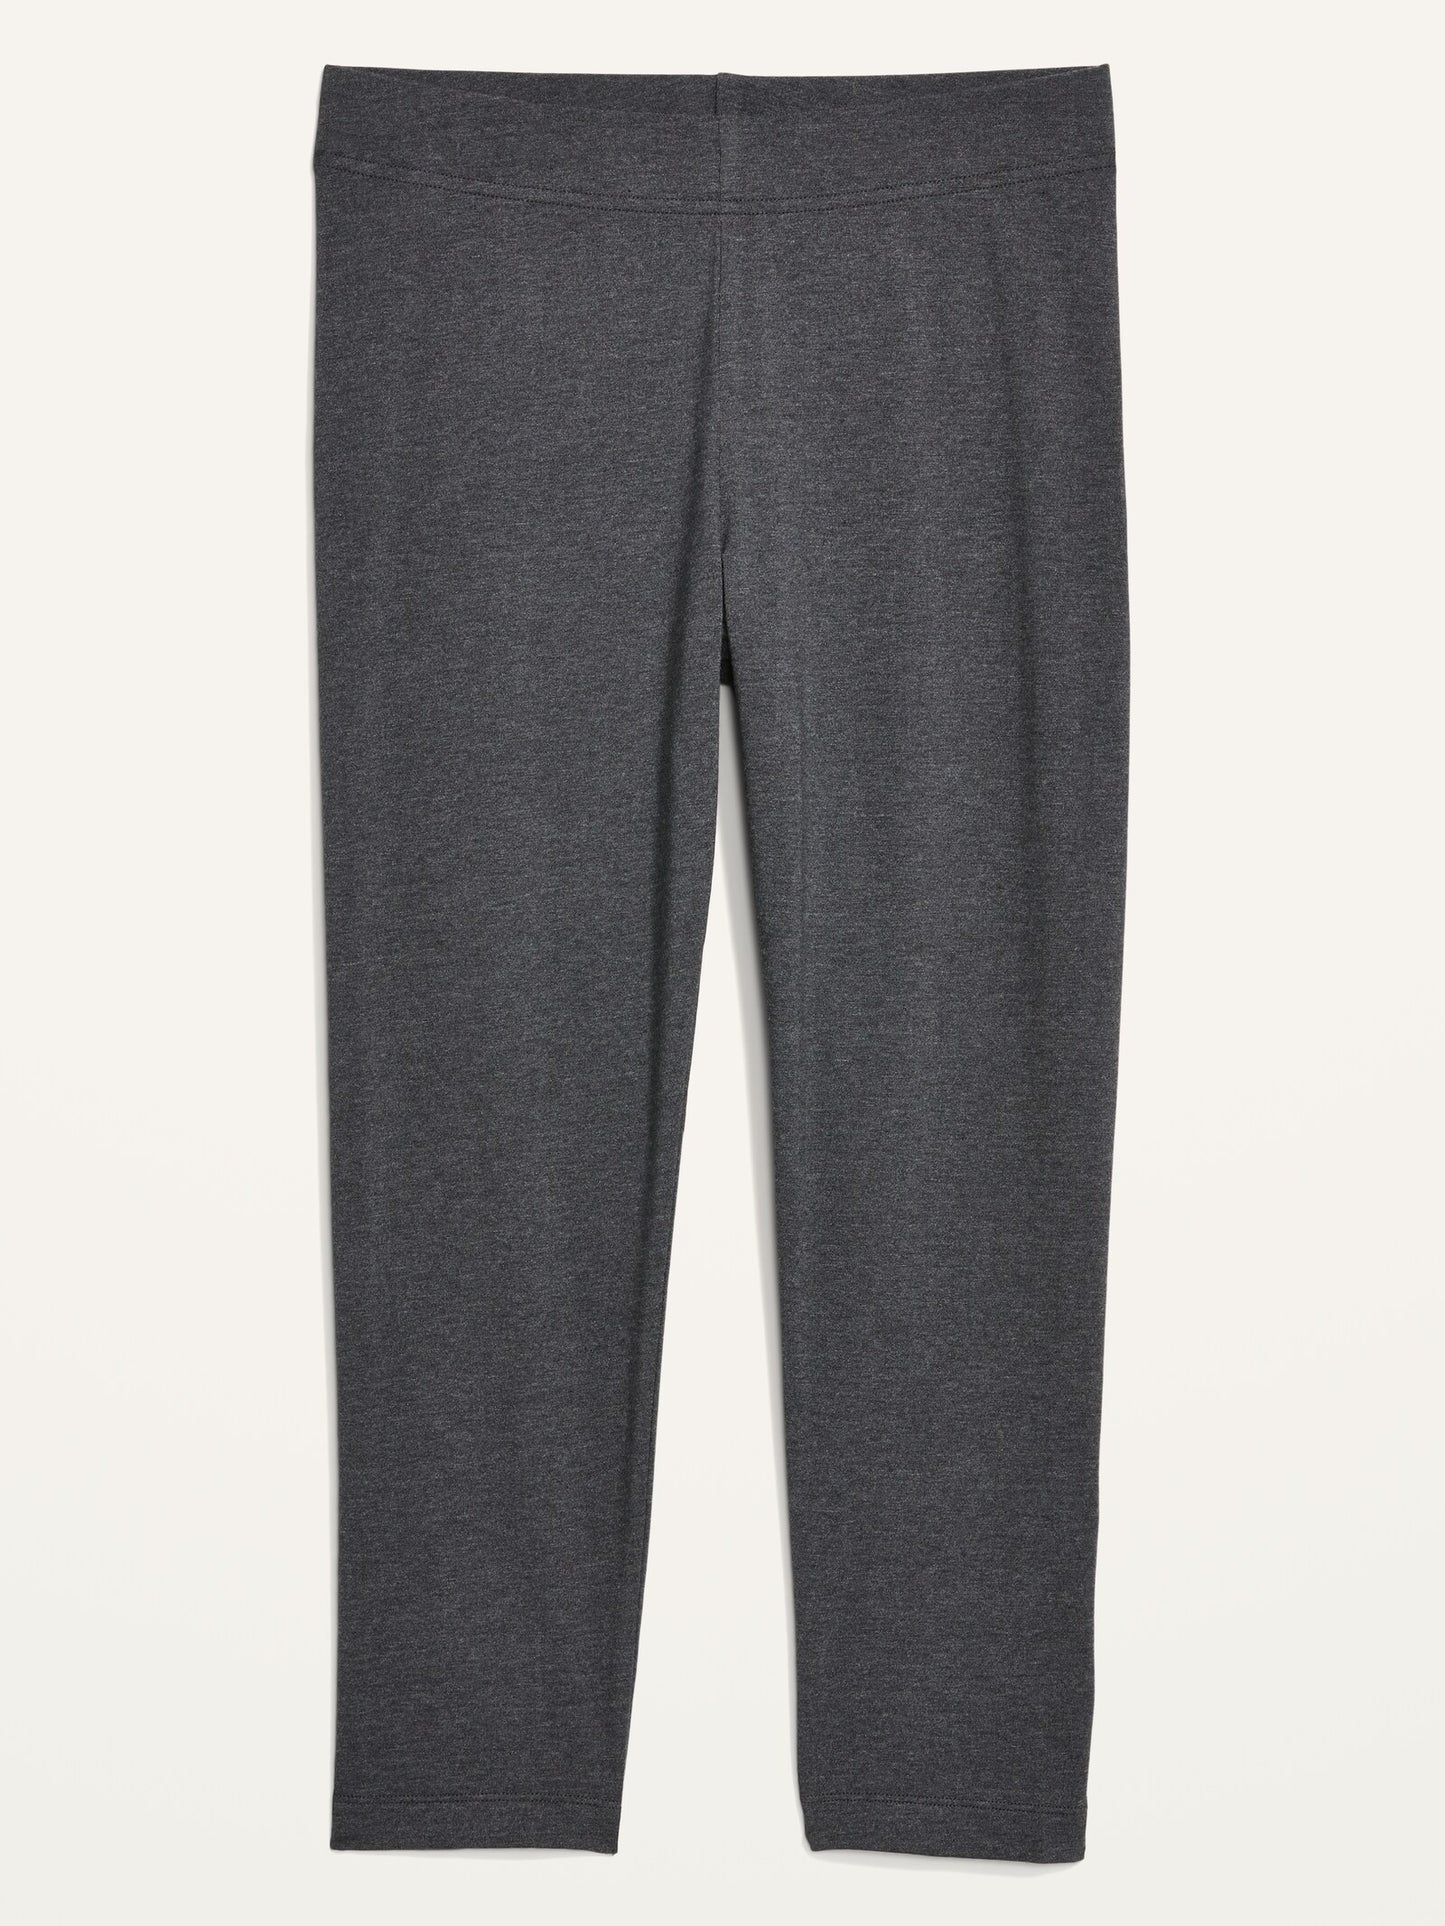 ON High-Waisted Cropped Leggings For Women - Grey